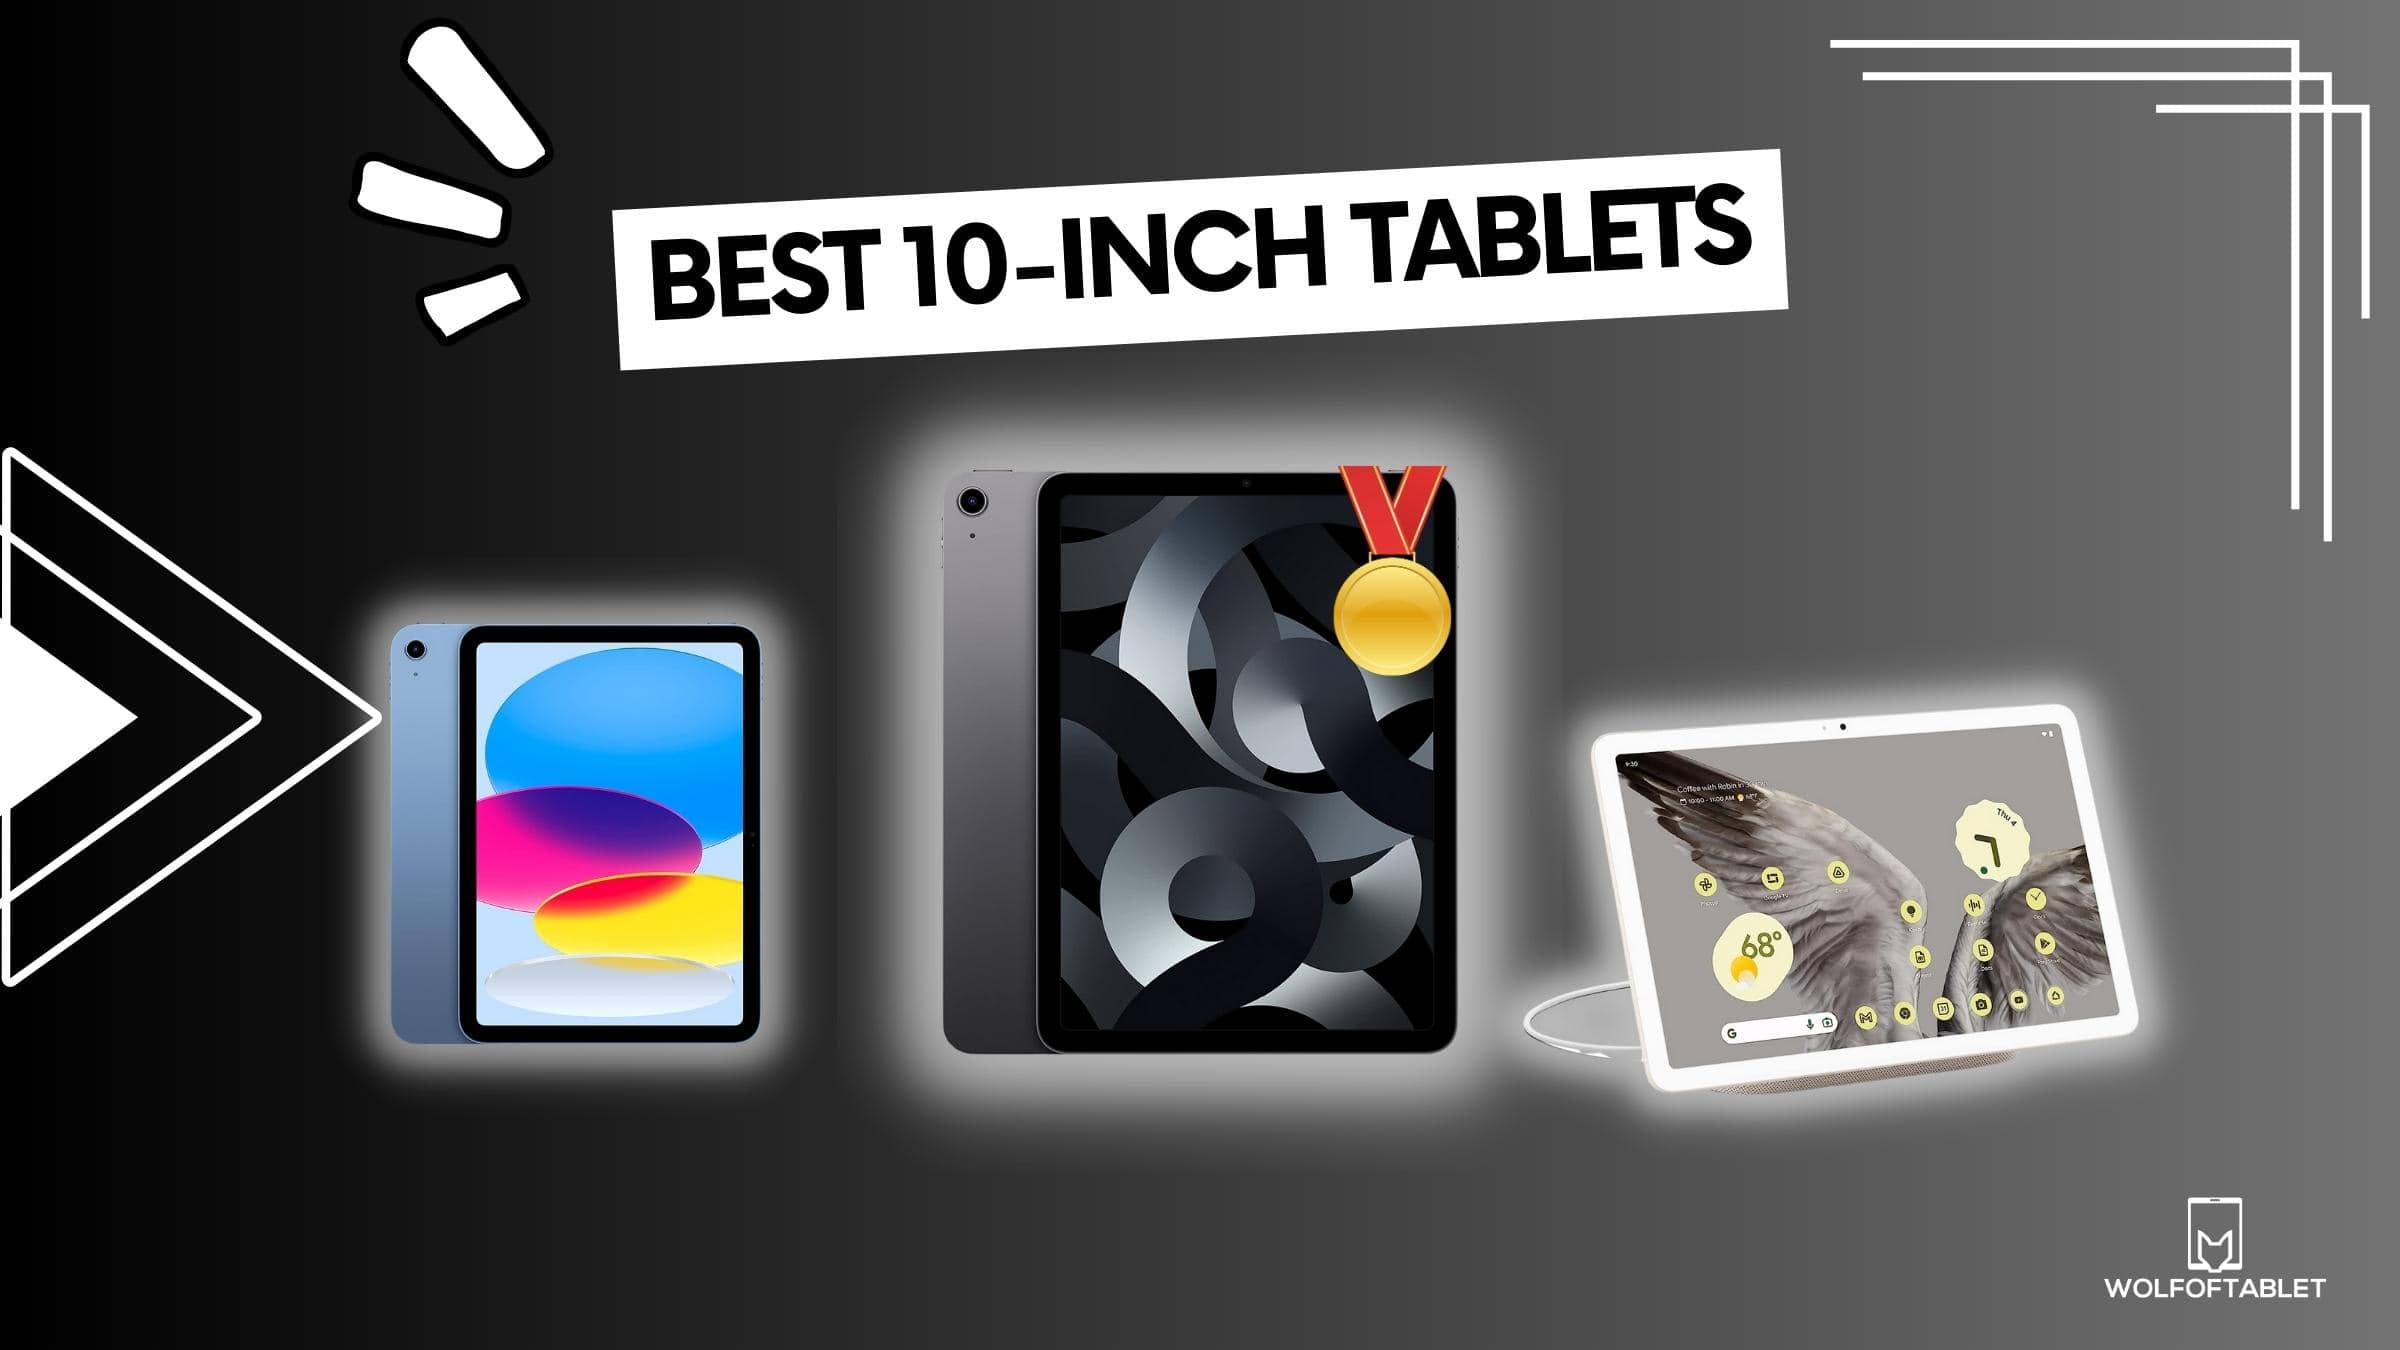 here are the top 10 10-inch tablets in the market - with pros and cons